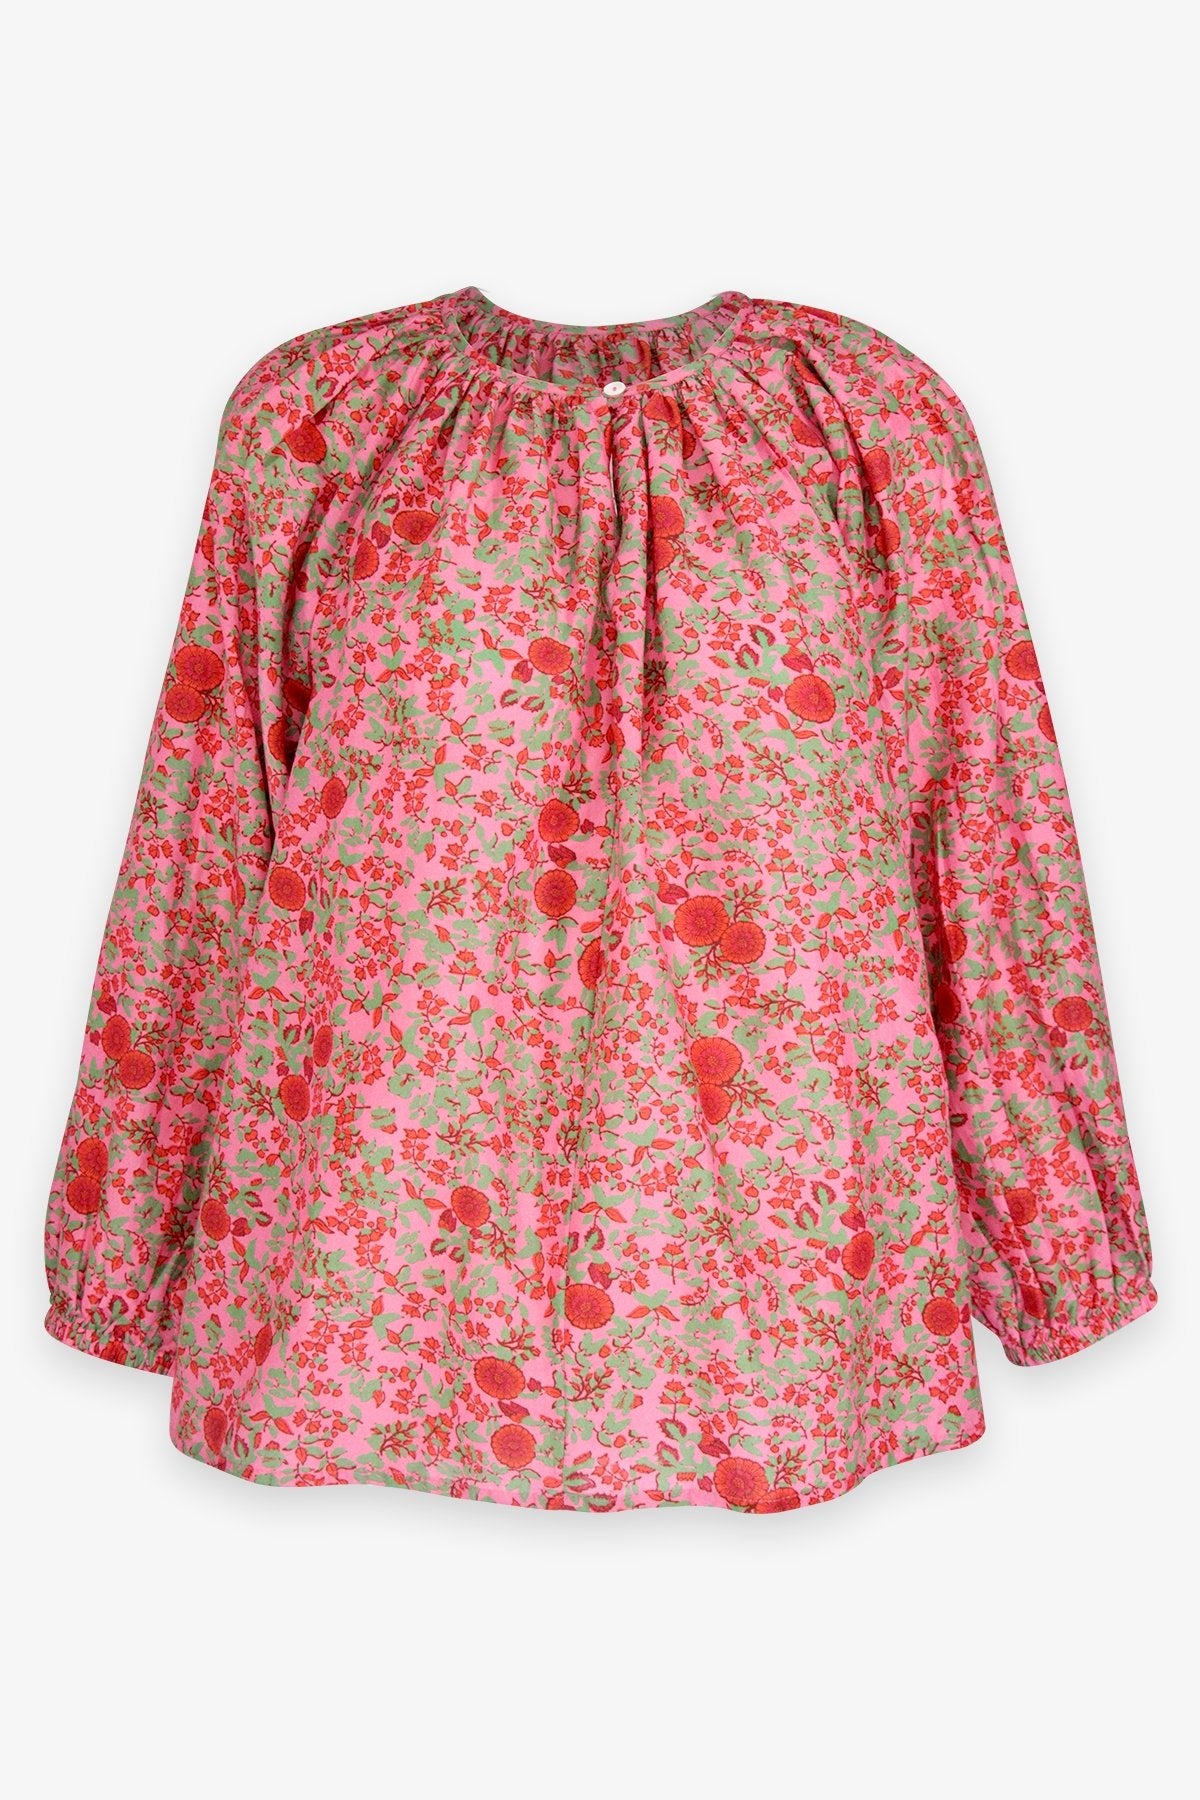 Rhody Anette Top in Pink - shop-olivia.com